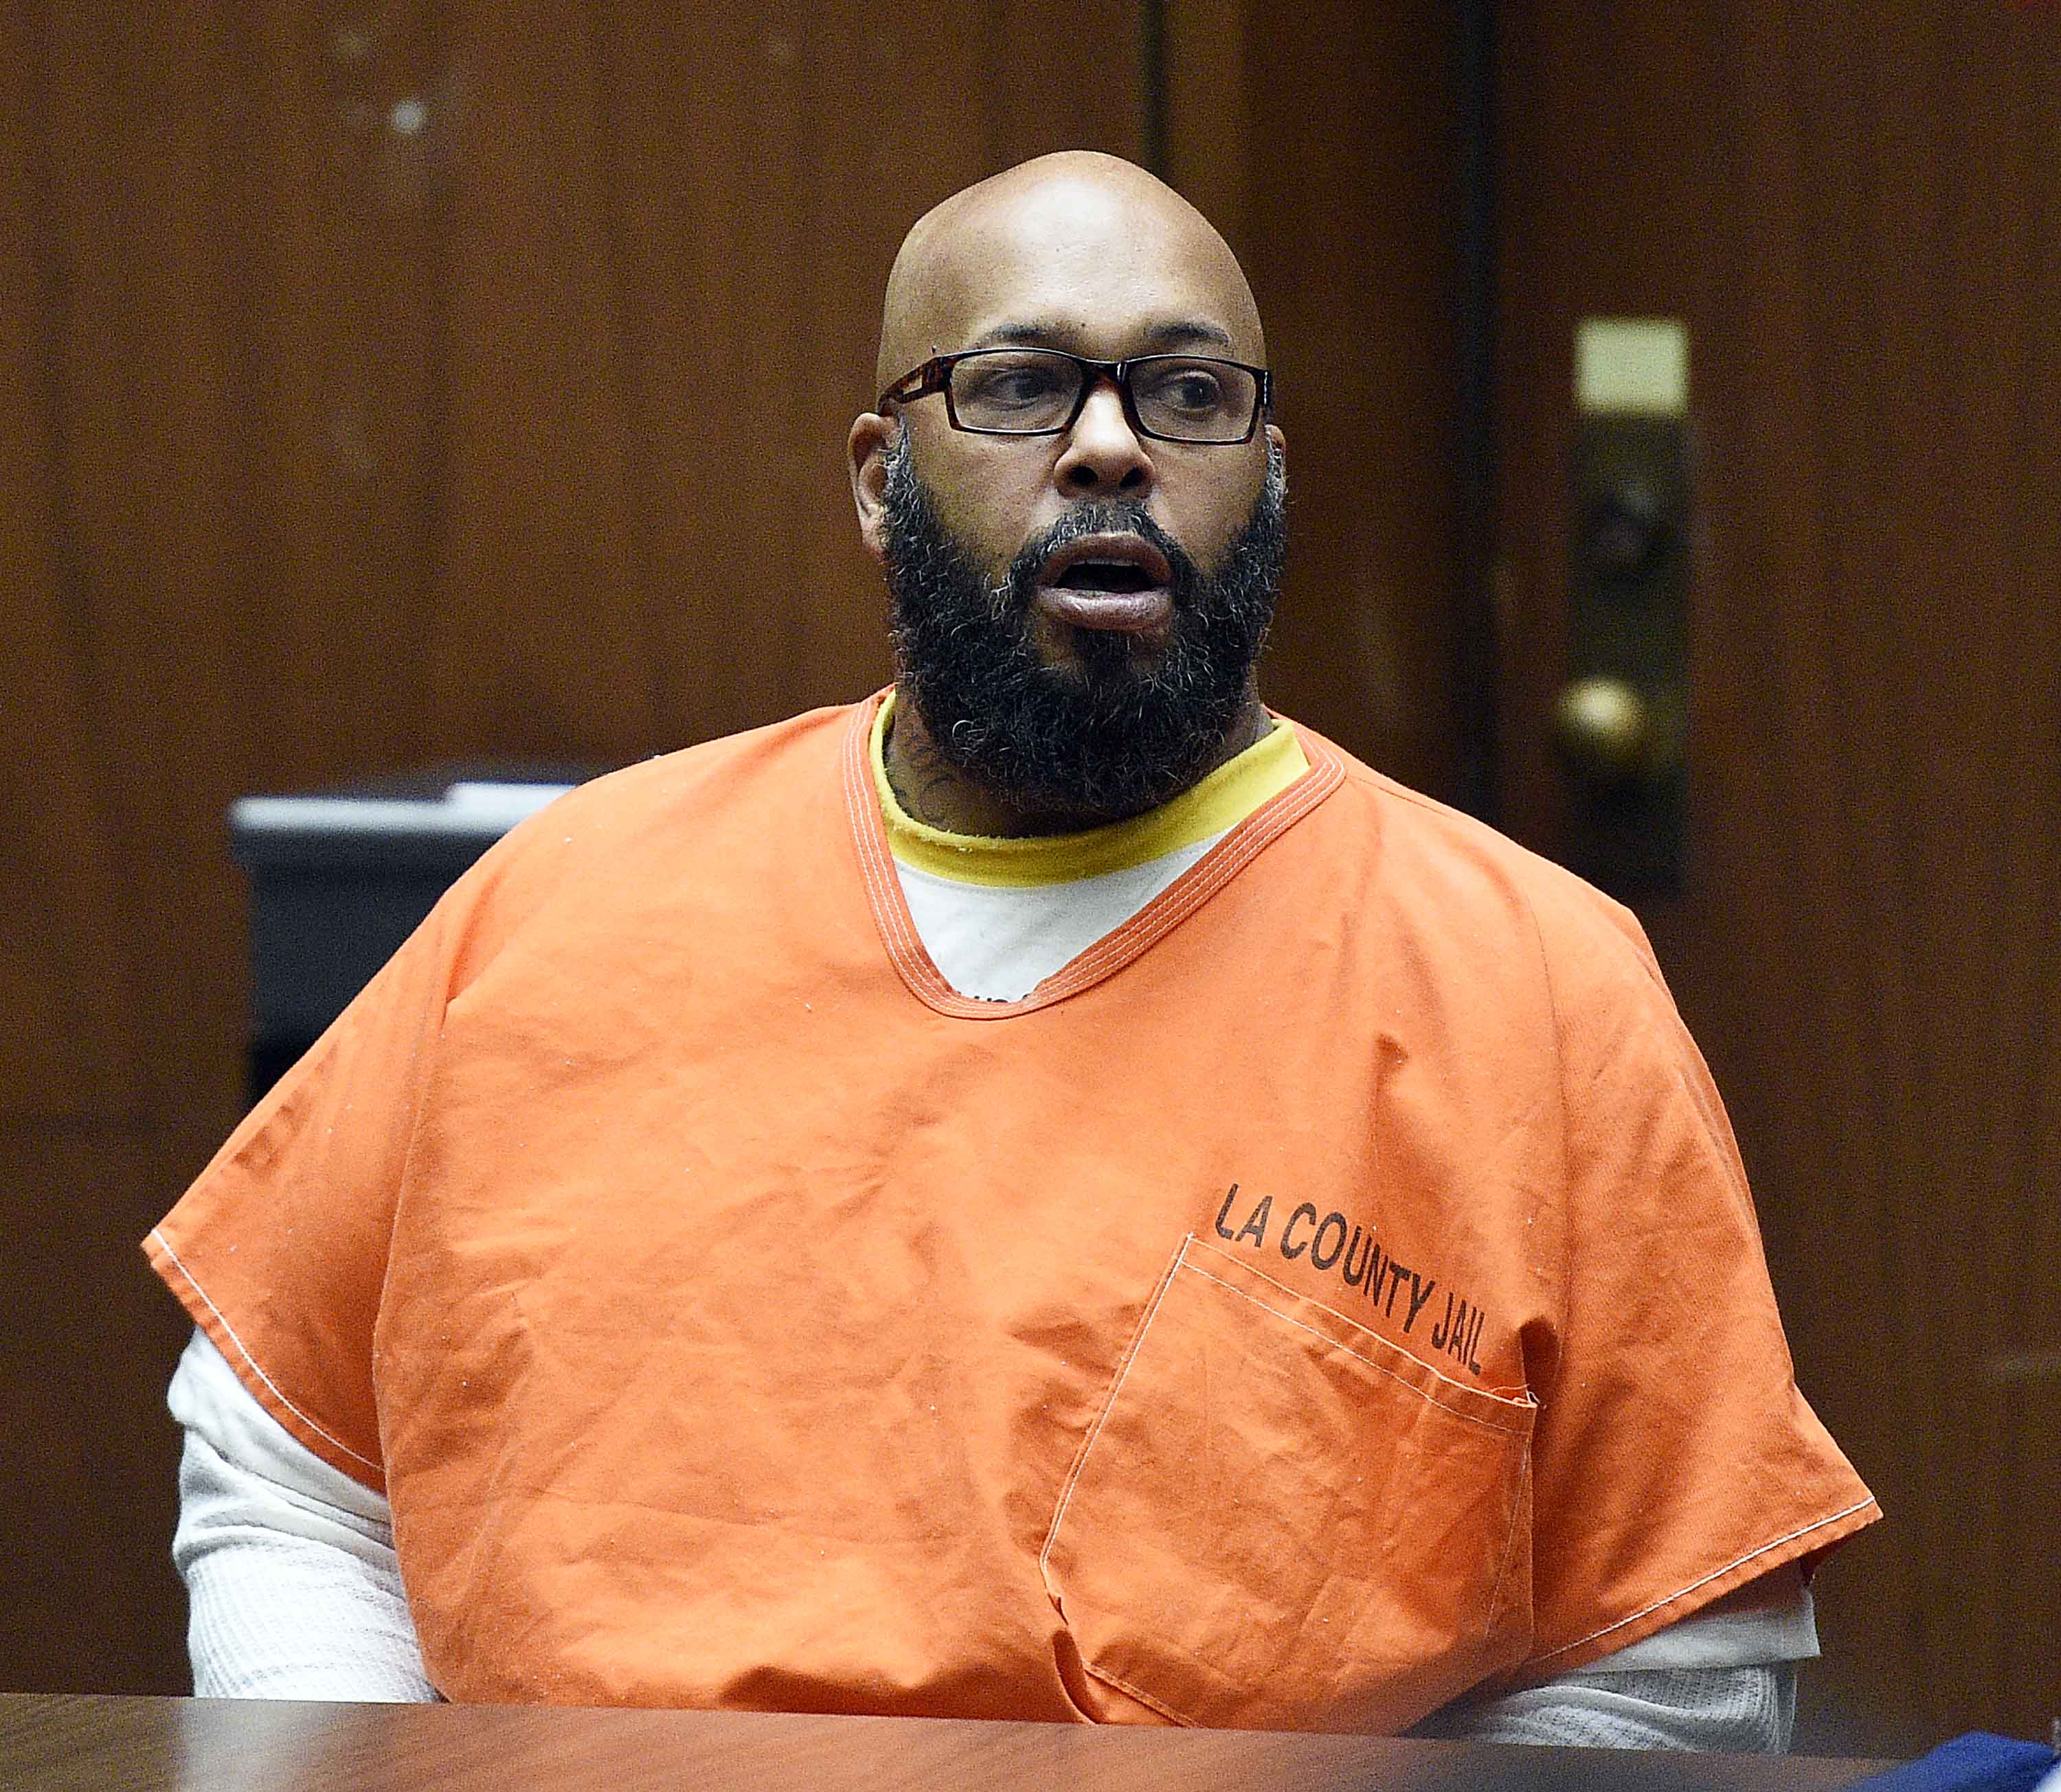 Marion "Suge" Knight at the Clara Shortridge Foltz Criminal Justice Center March 9, 2015 in Los Angeles, California. | Source: Getty Images